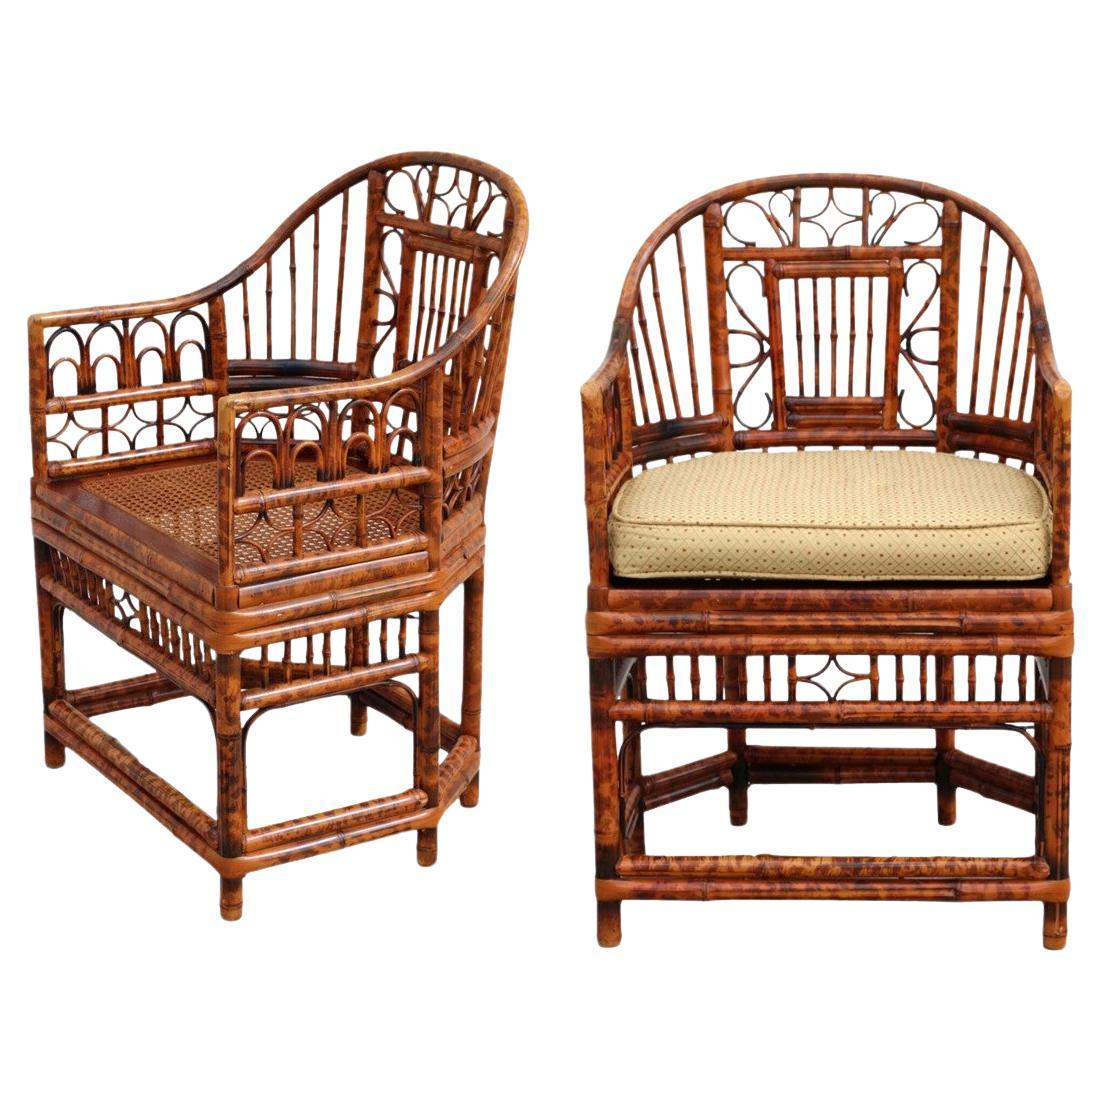 Brighton Pavilion Style Tortoiseshell Bamboo Cane Dining Armchairs, a Pair For Sale